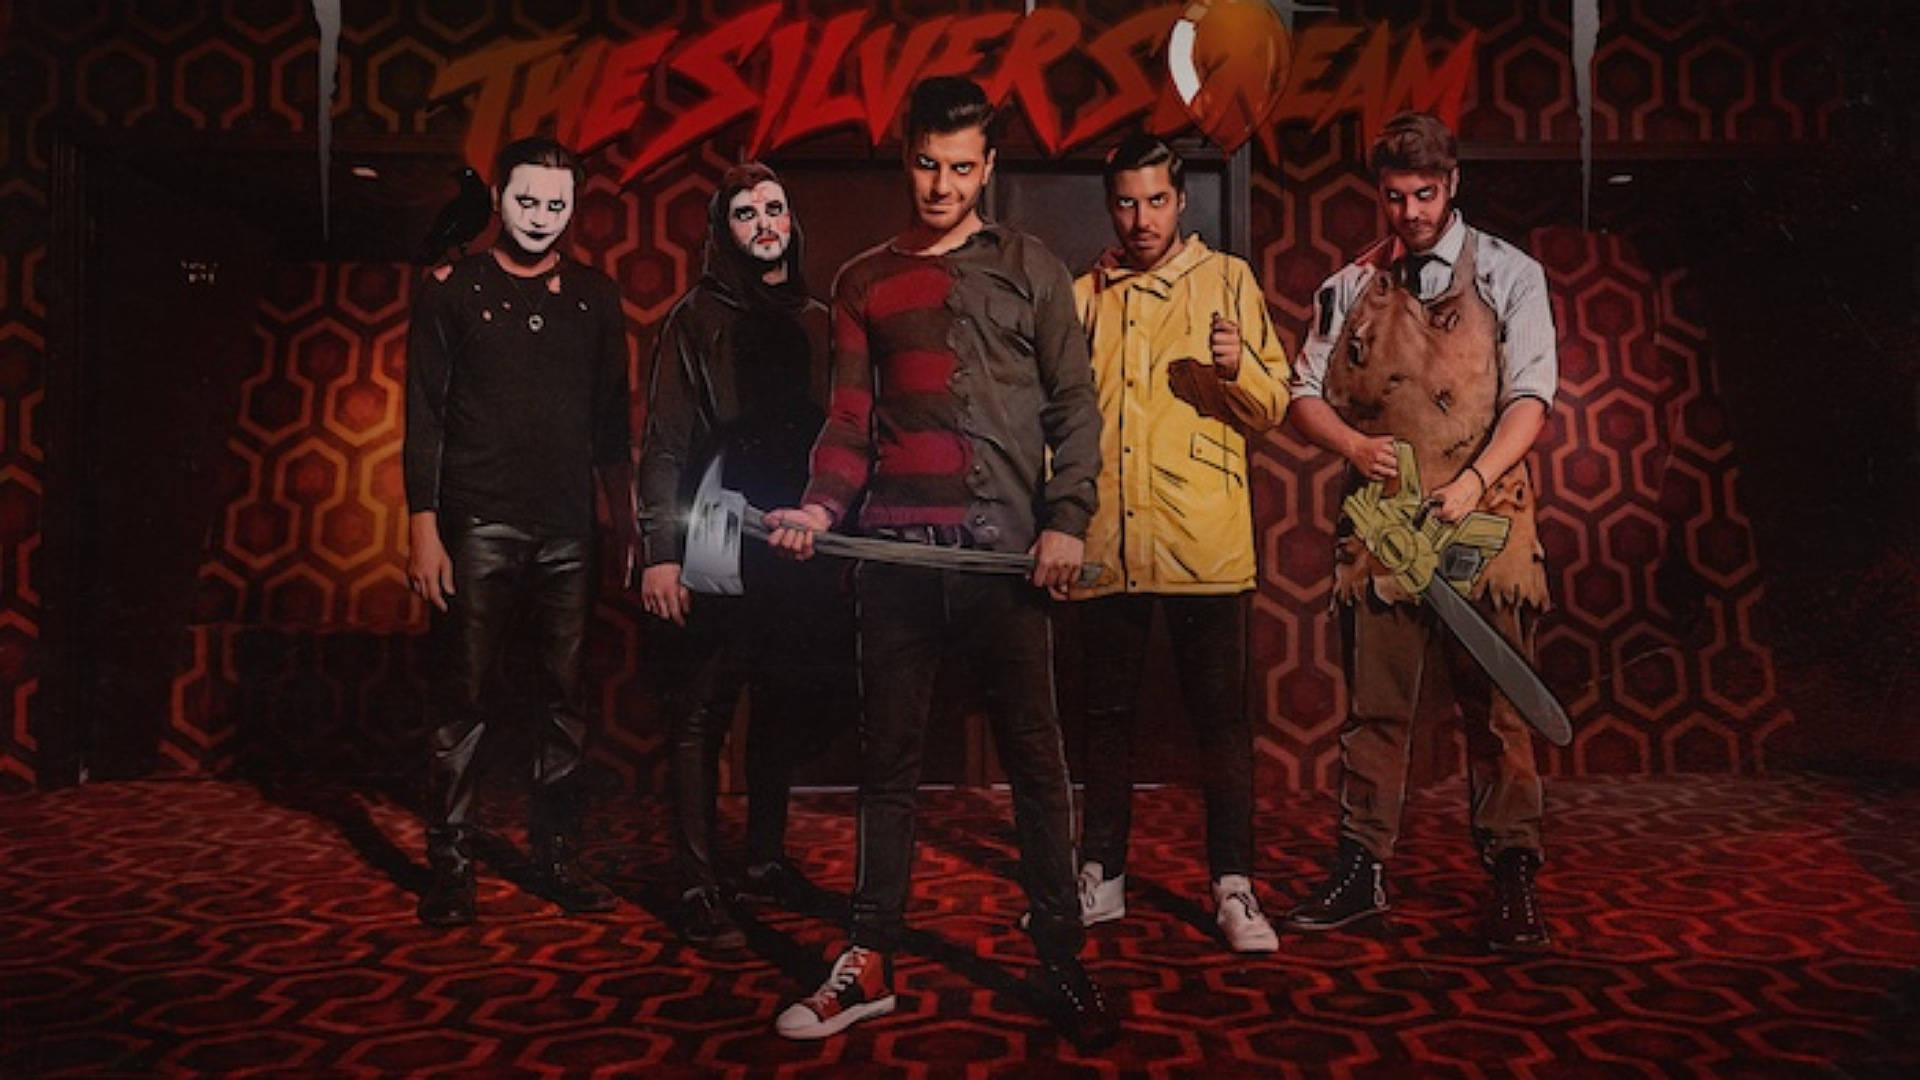 Ice Nine Kills With Scary Appearance Wallpaper